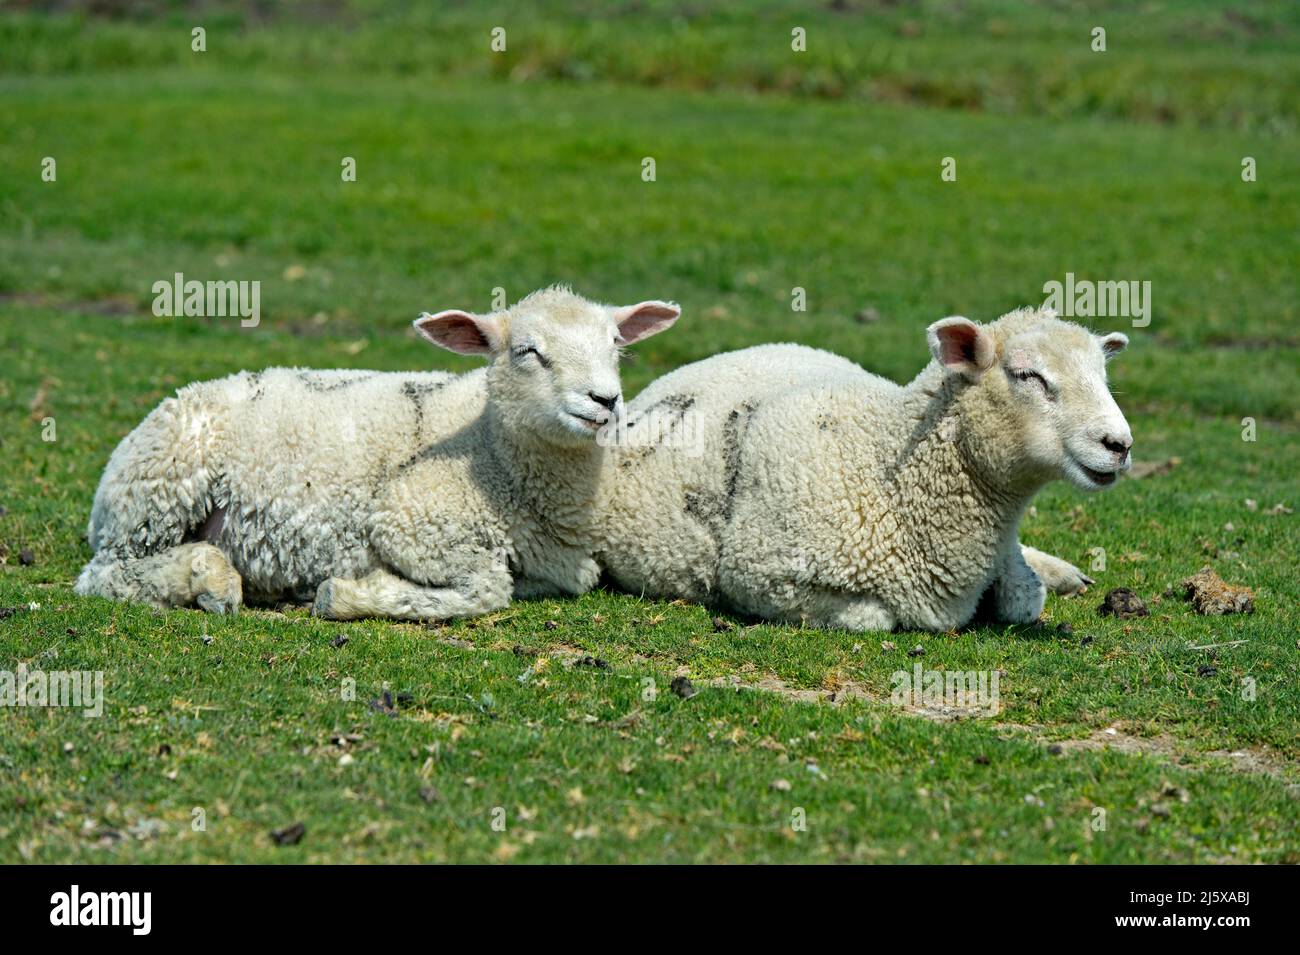 Two lambs of the Texel sheep breed resting on a pasture in the marshland, Schleswig-Holstein Wadden Sea National Park, Westerhever, Germany Stock Photo